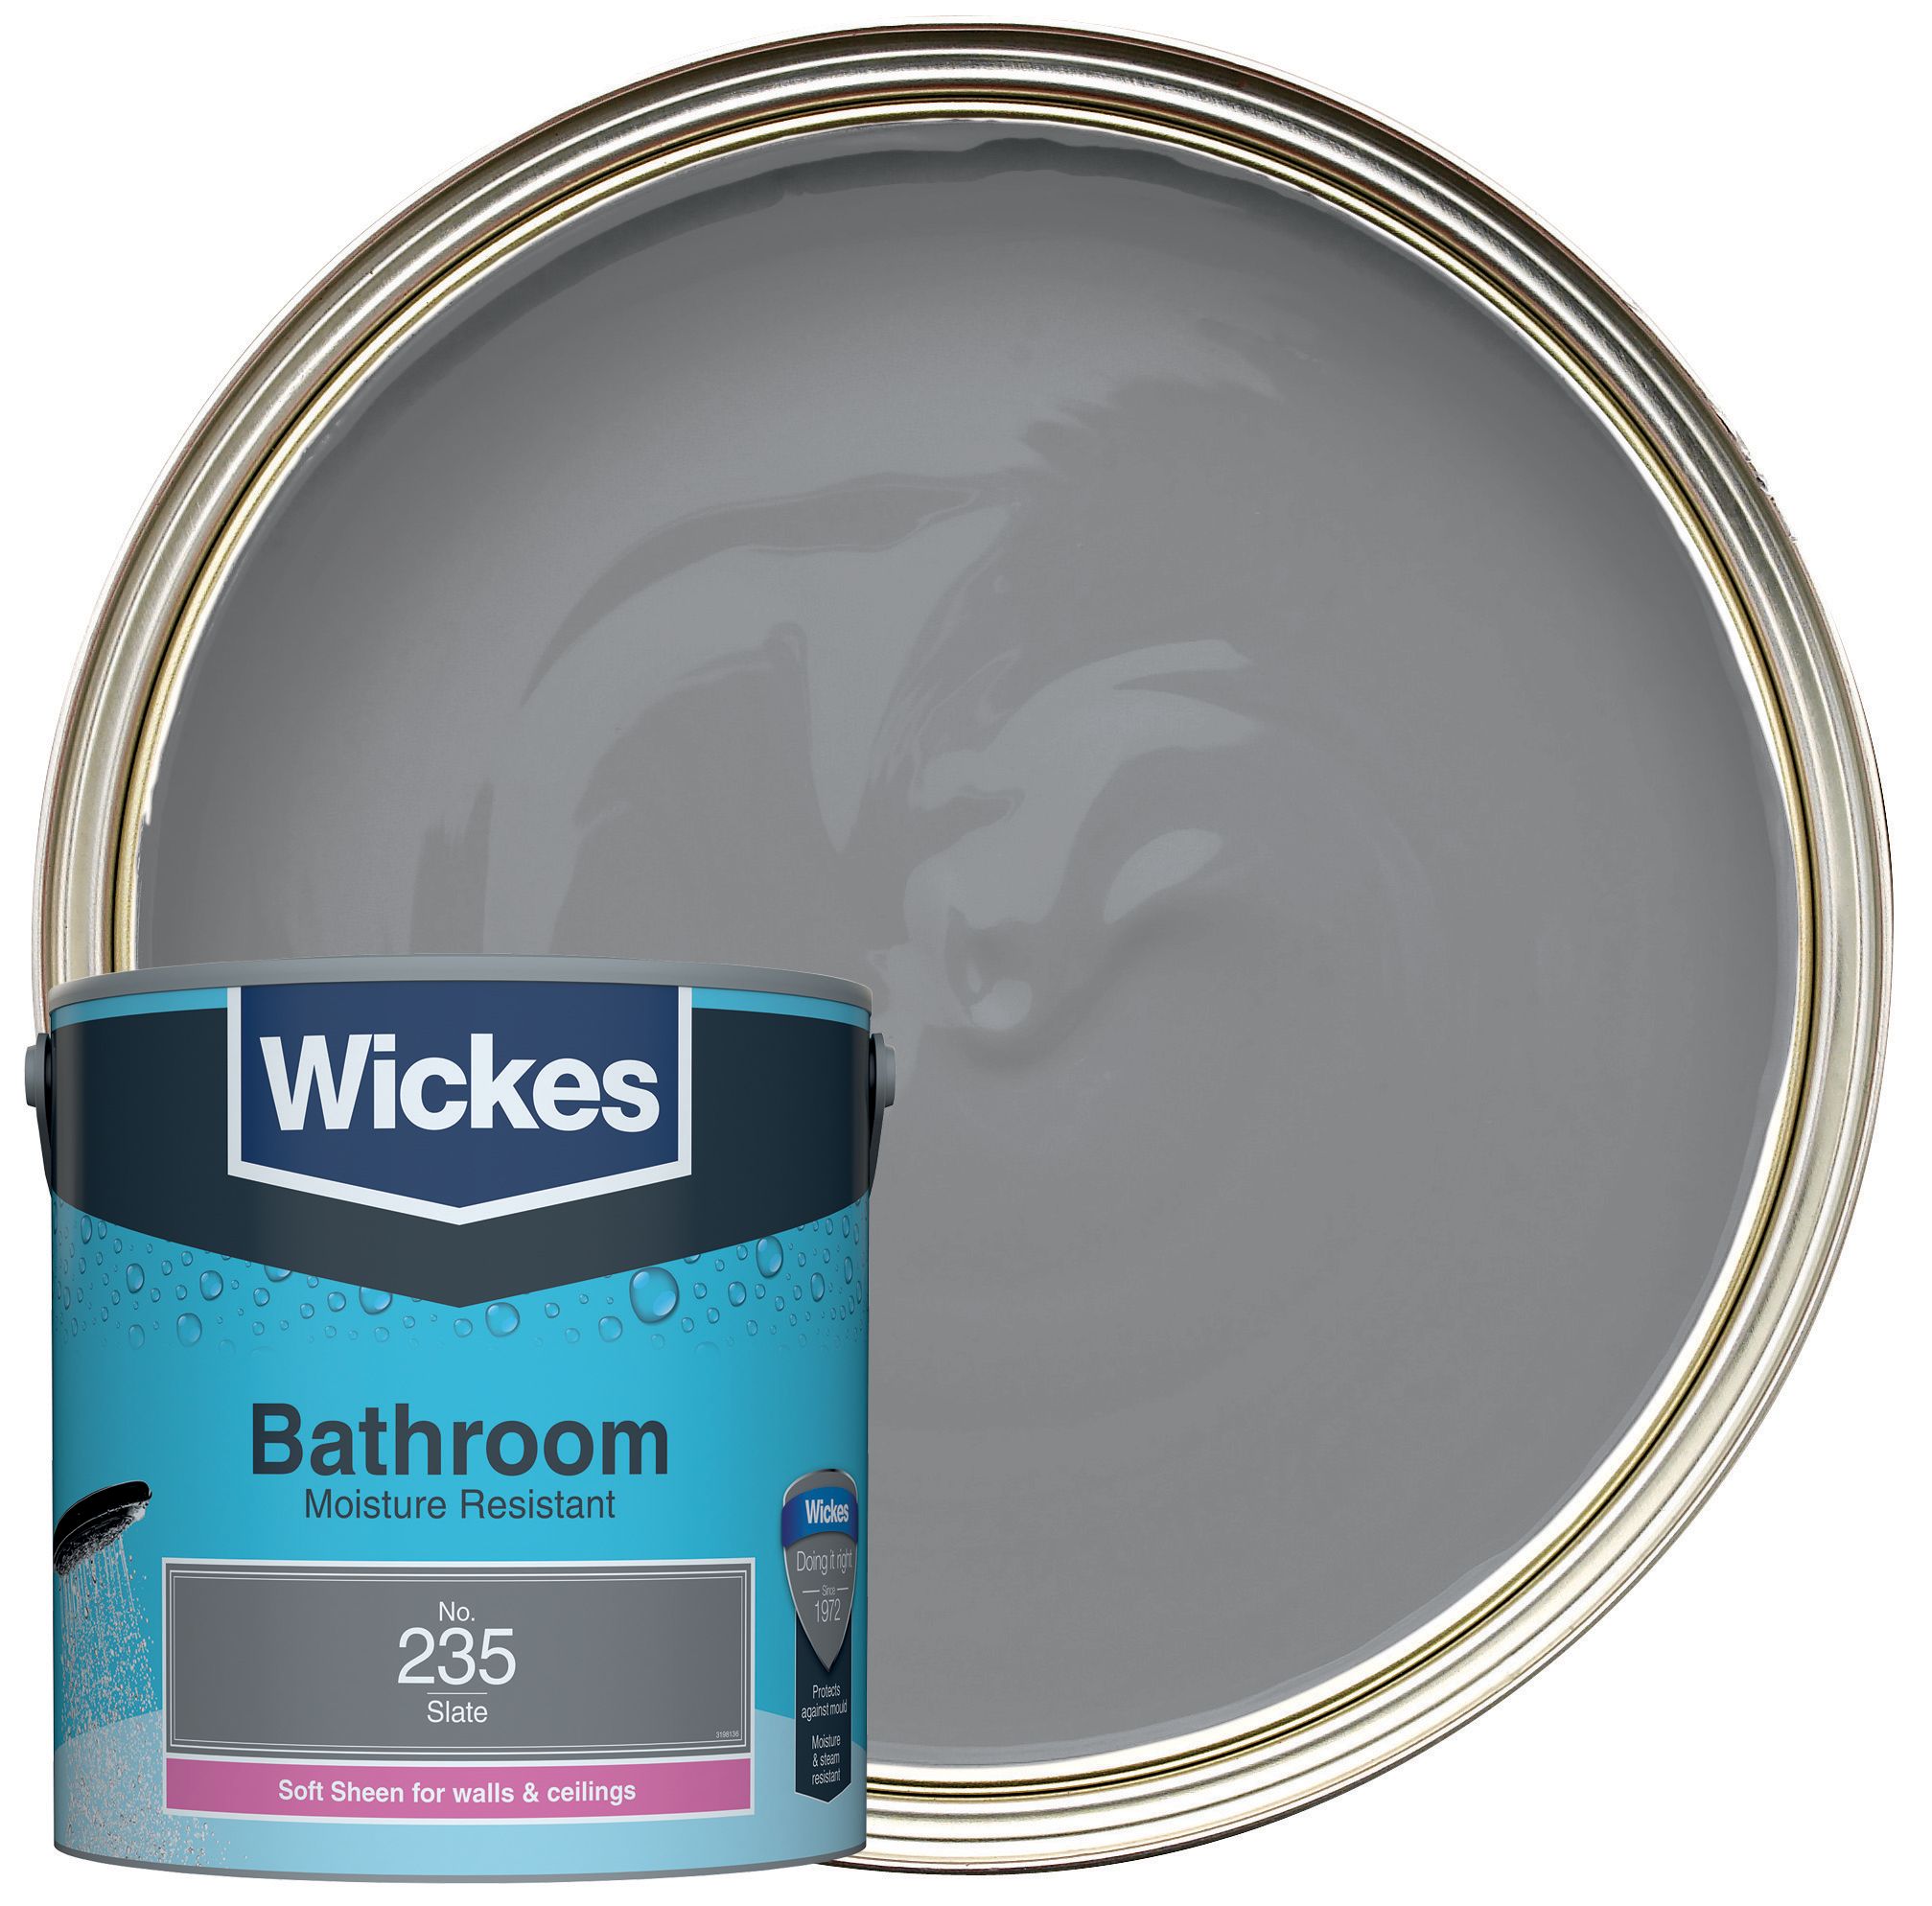 Image of Wickes Bathroom Soft Sheen Emulsion Paint - Slate No.235 - 2.5L